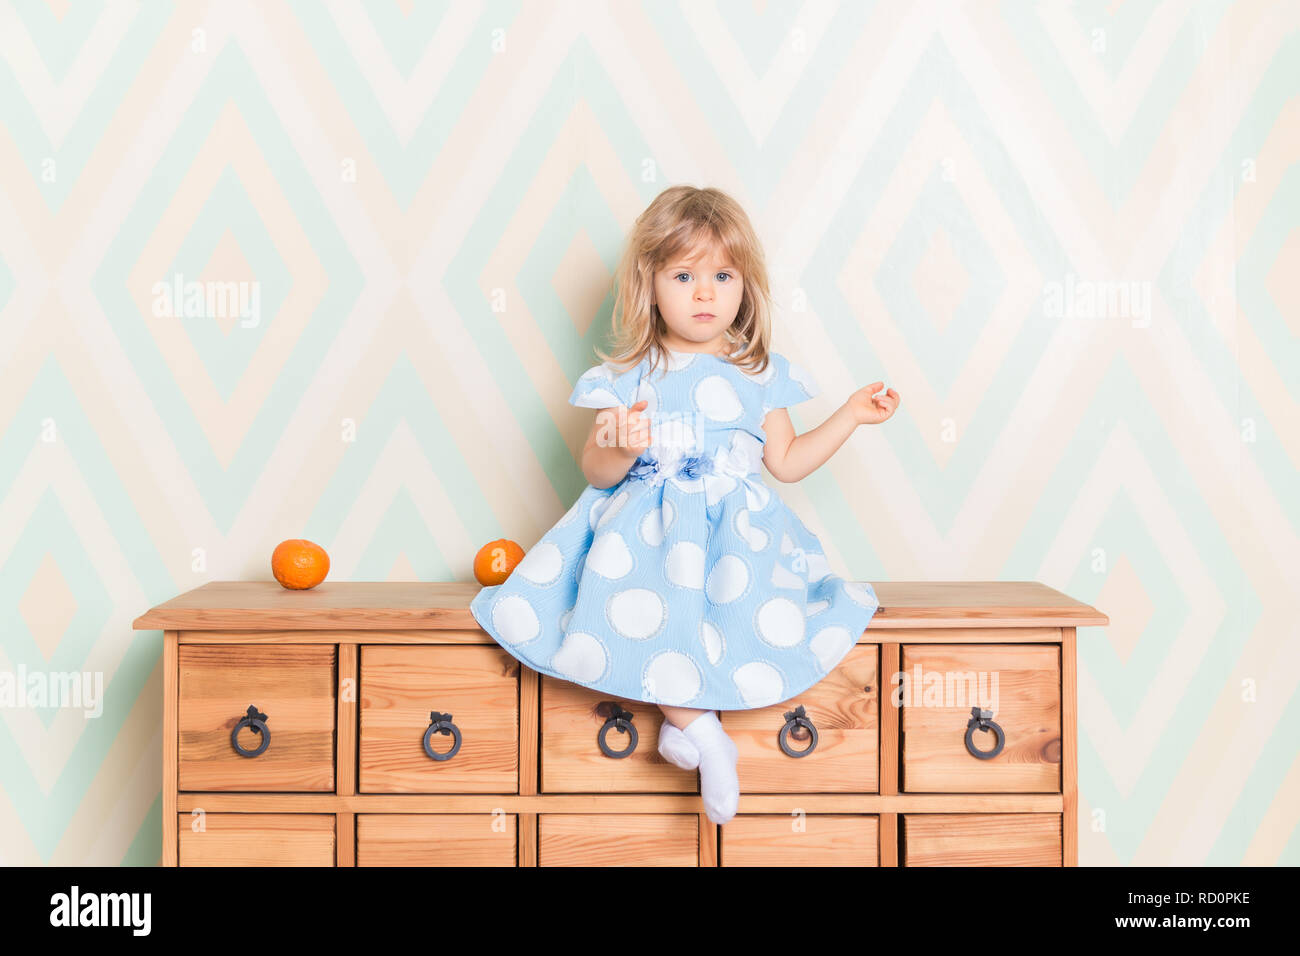 A little baby girl in her room sitting cross-legged on chest of drawers with tangerines on the rhomb wallpaper background. Child in blue polka dot dress and white socks attentively looking at camera Stock Photo